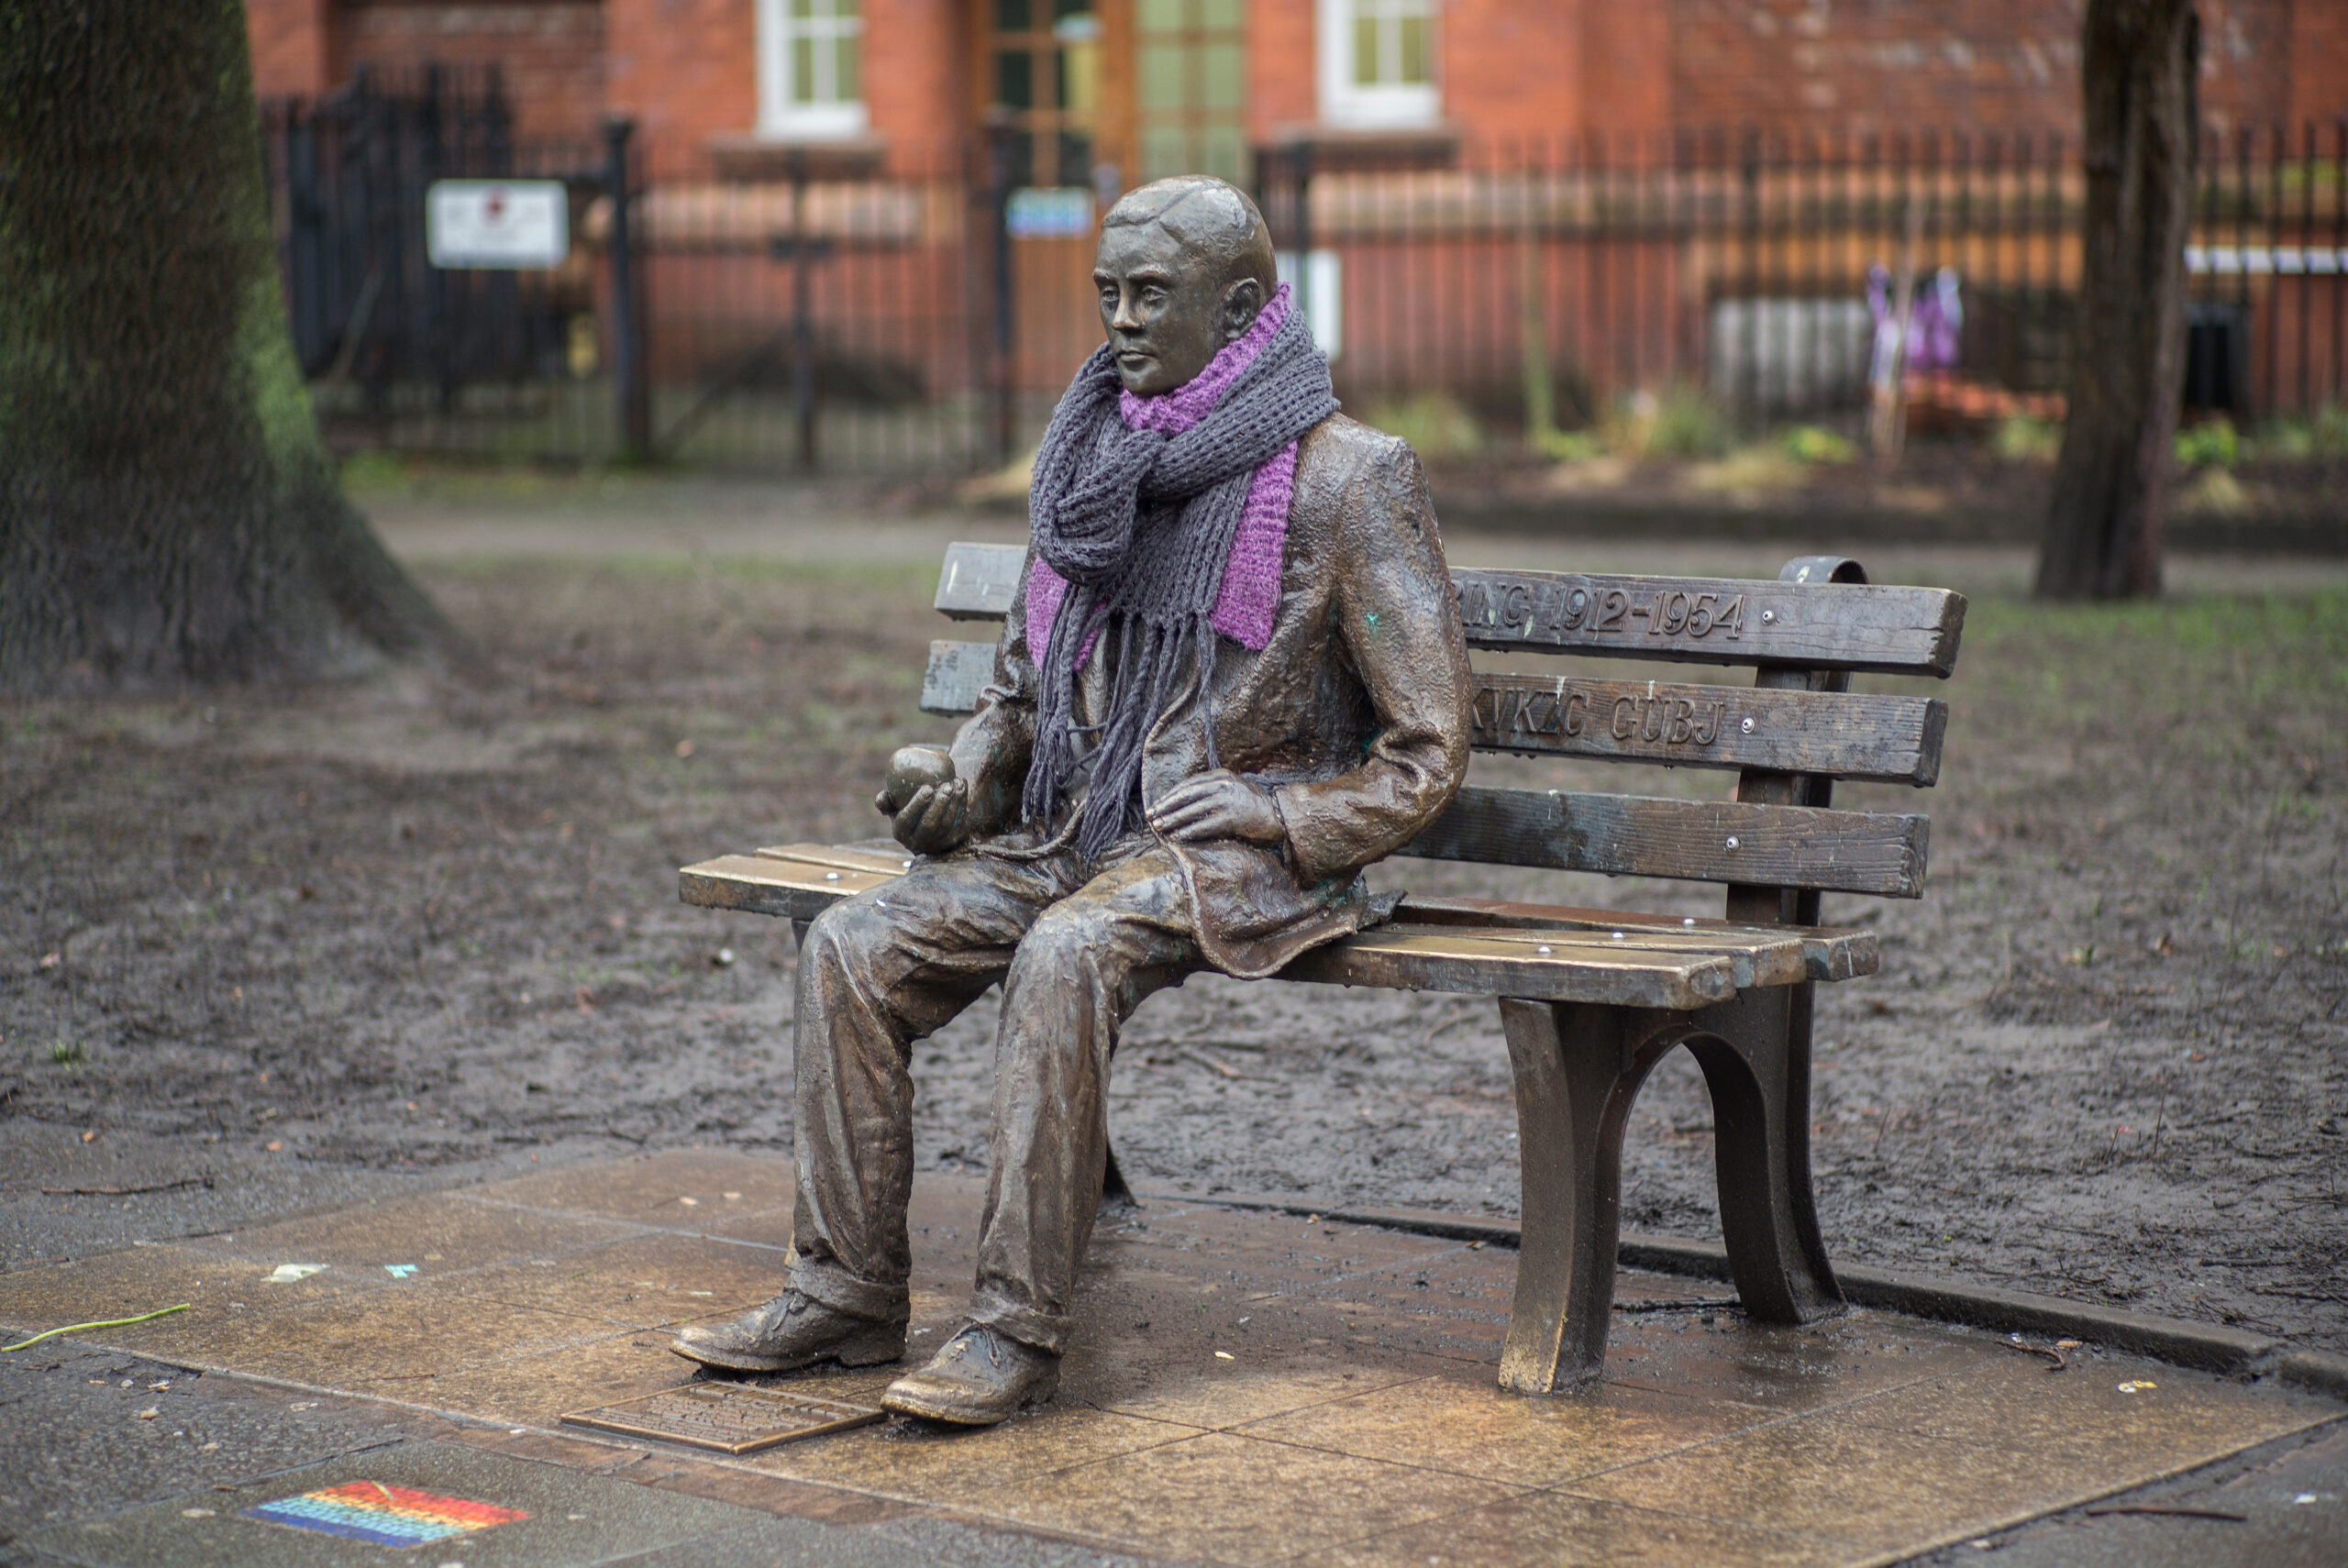 Is the Facebook Post About Alan Turing’s Life Truthful?